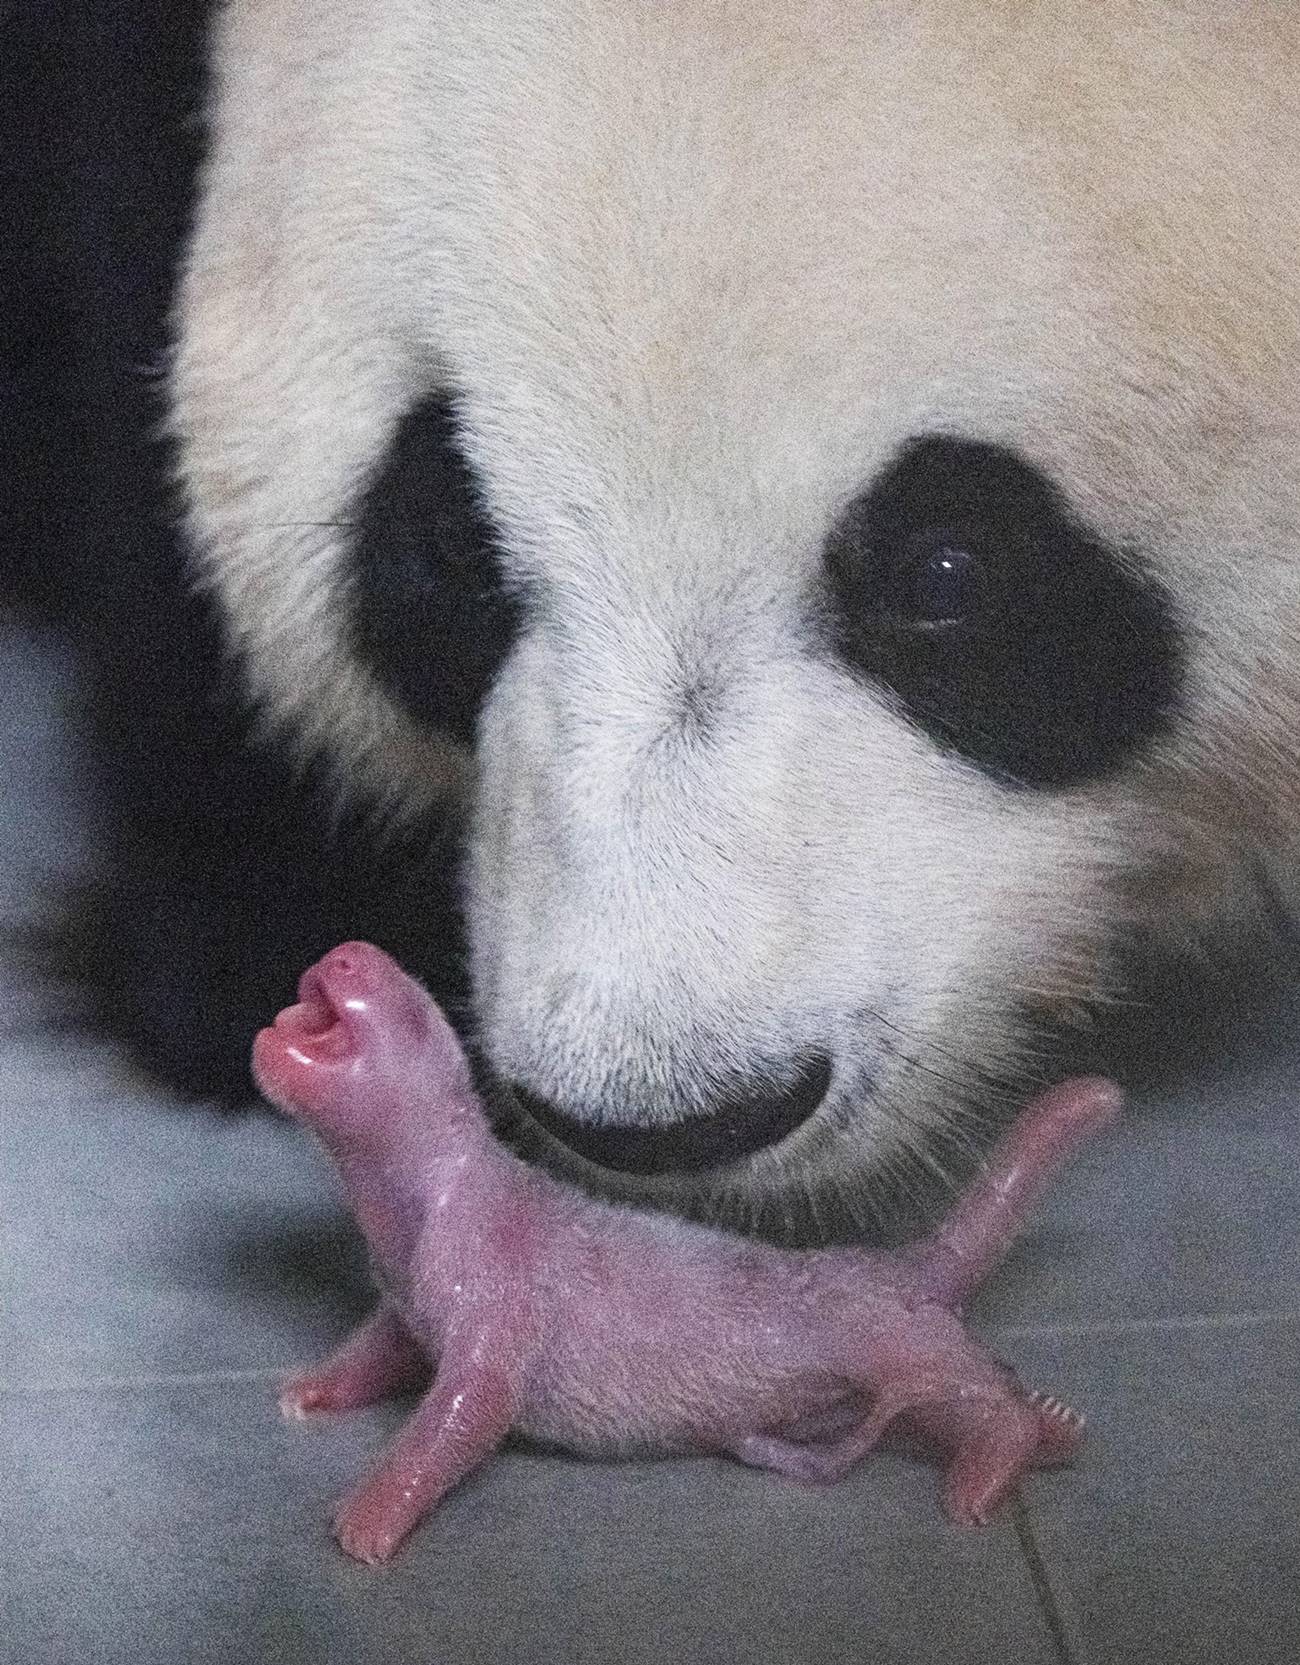 Fu Bao shortly after birth, nuzzled by her mother Ai Bao.